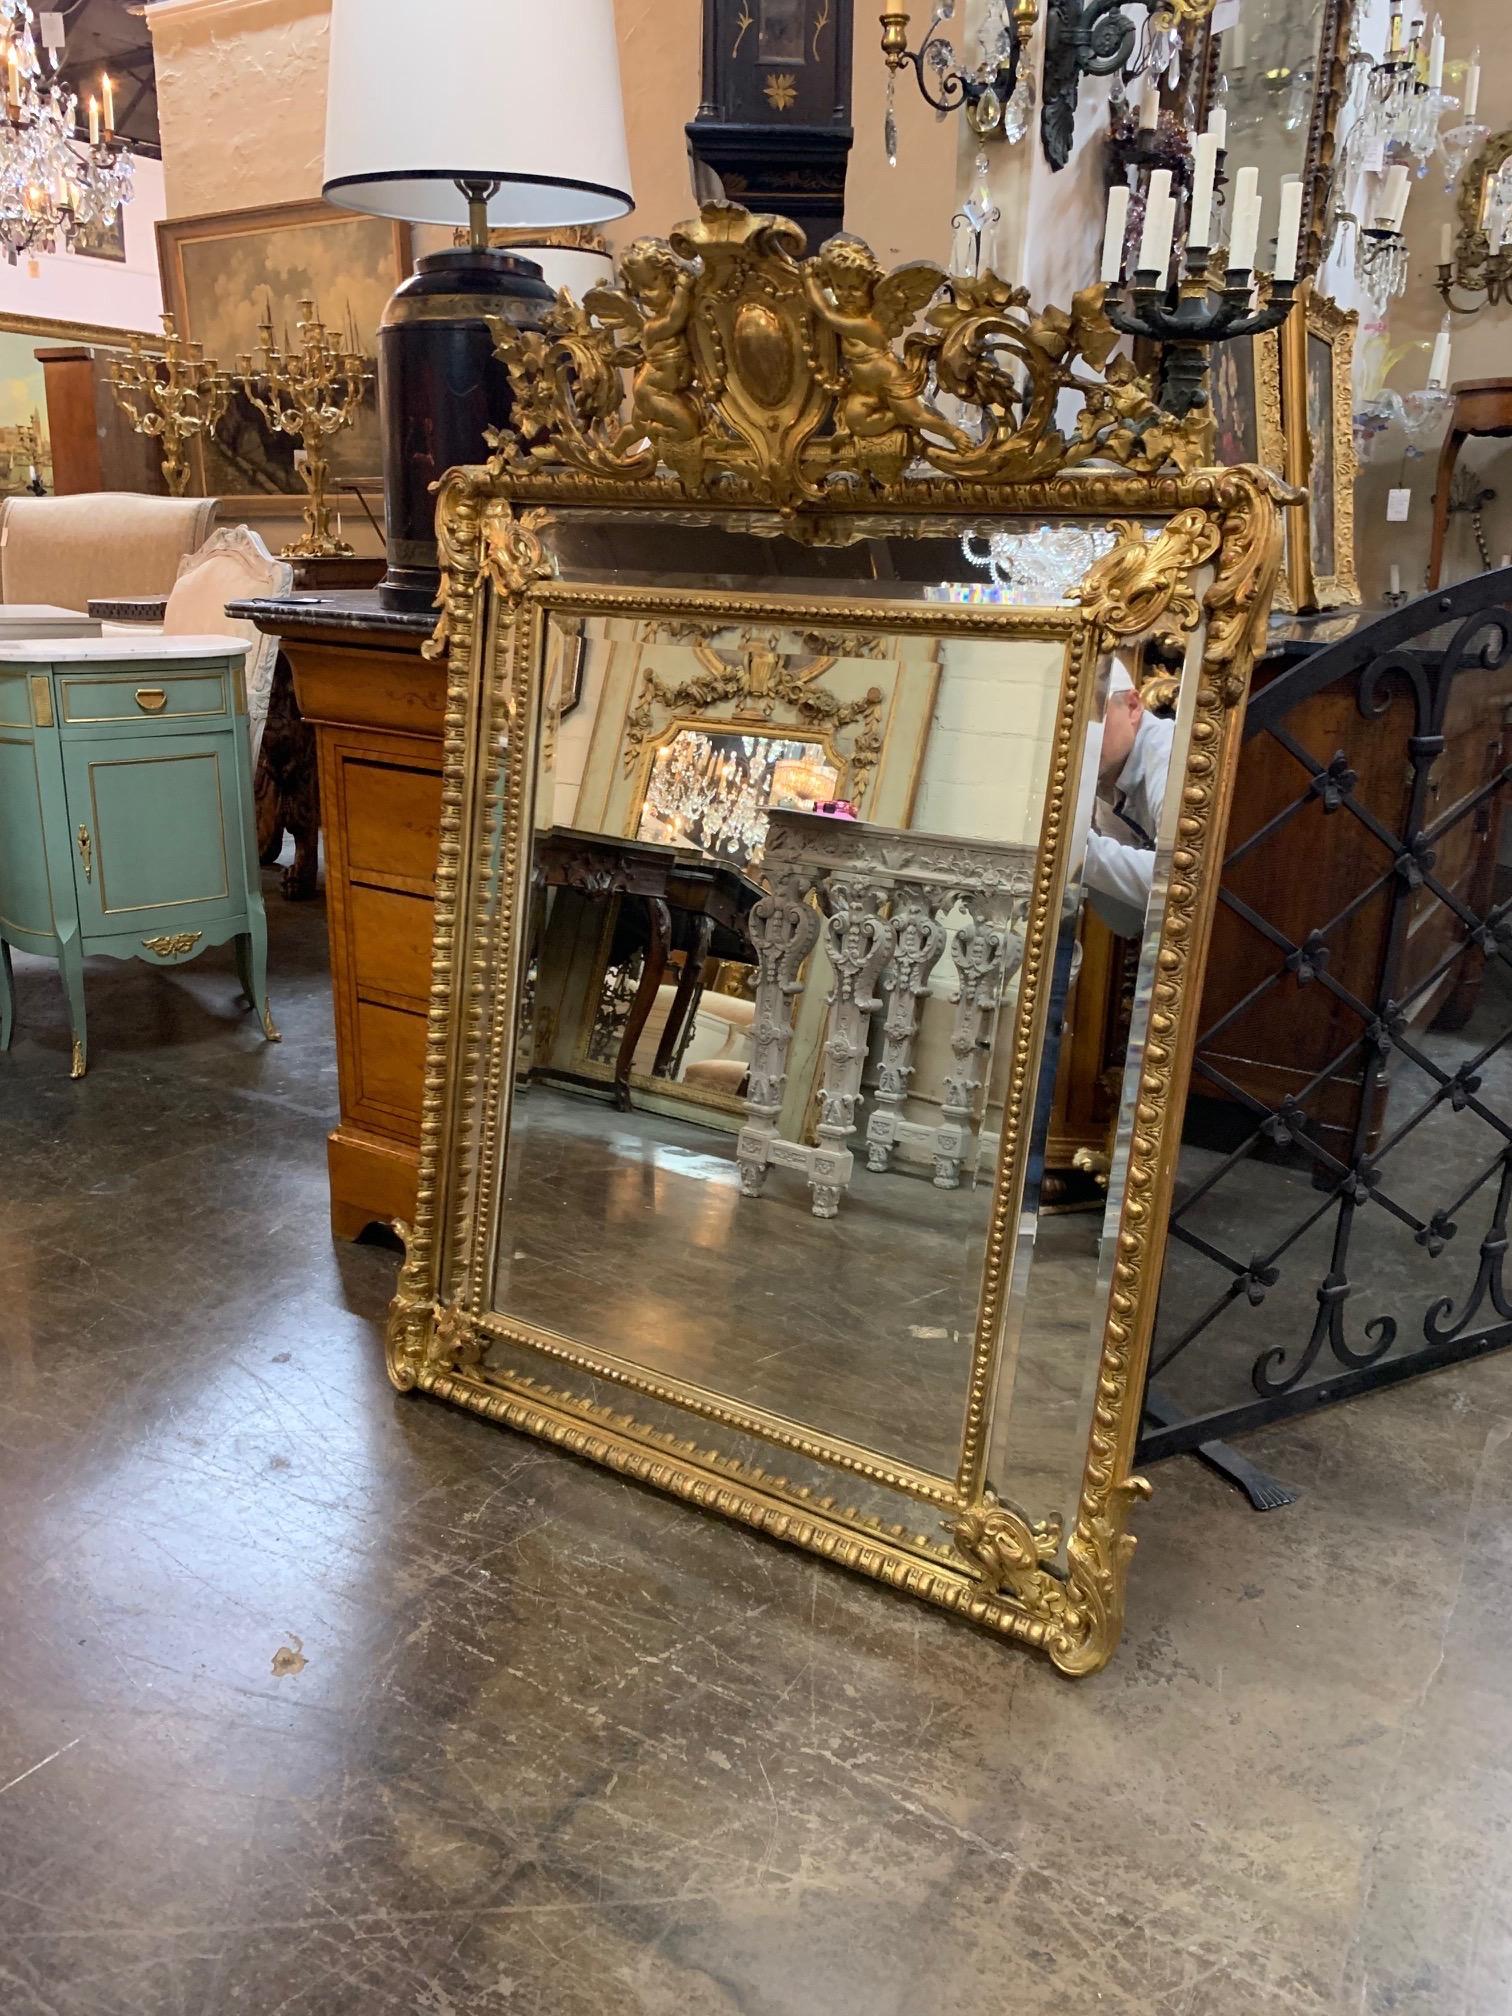 Stunning 19th century French Louis XV carved giltwood cushion mirror. Elaborate carving including a large crown and 2 cherubs. A true work of art!!